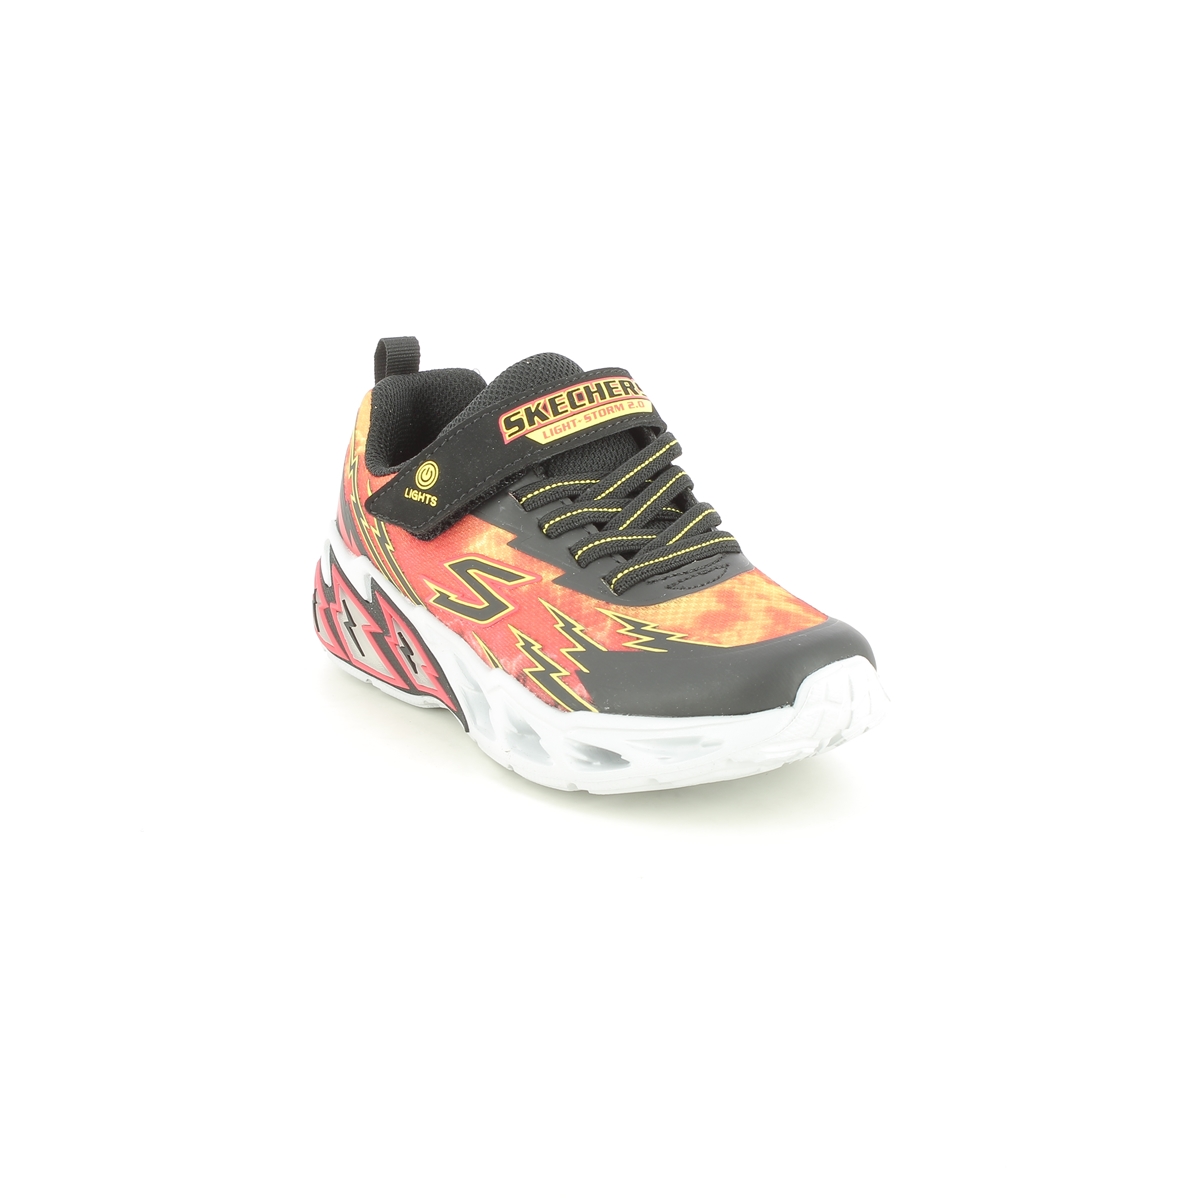 Skechers Light Storm 2.0 Black Red Kids Trainers 400150L In Size 34 In Plain Black Red For kids